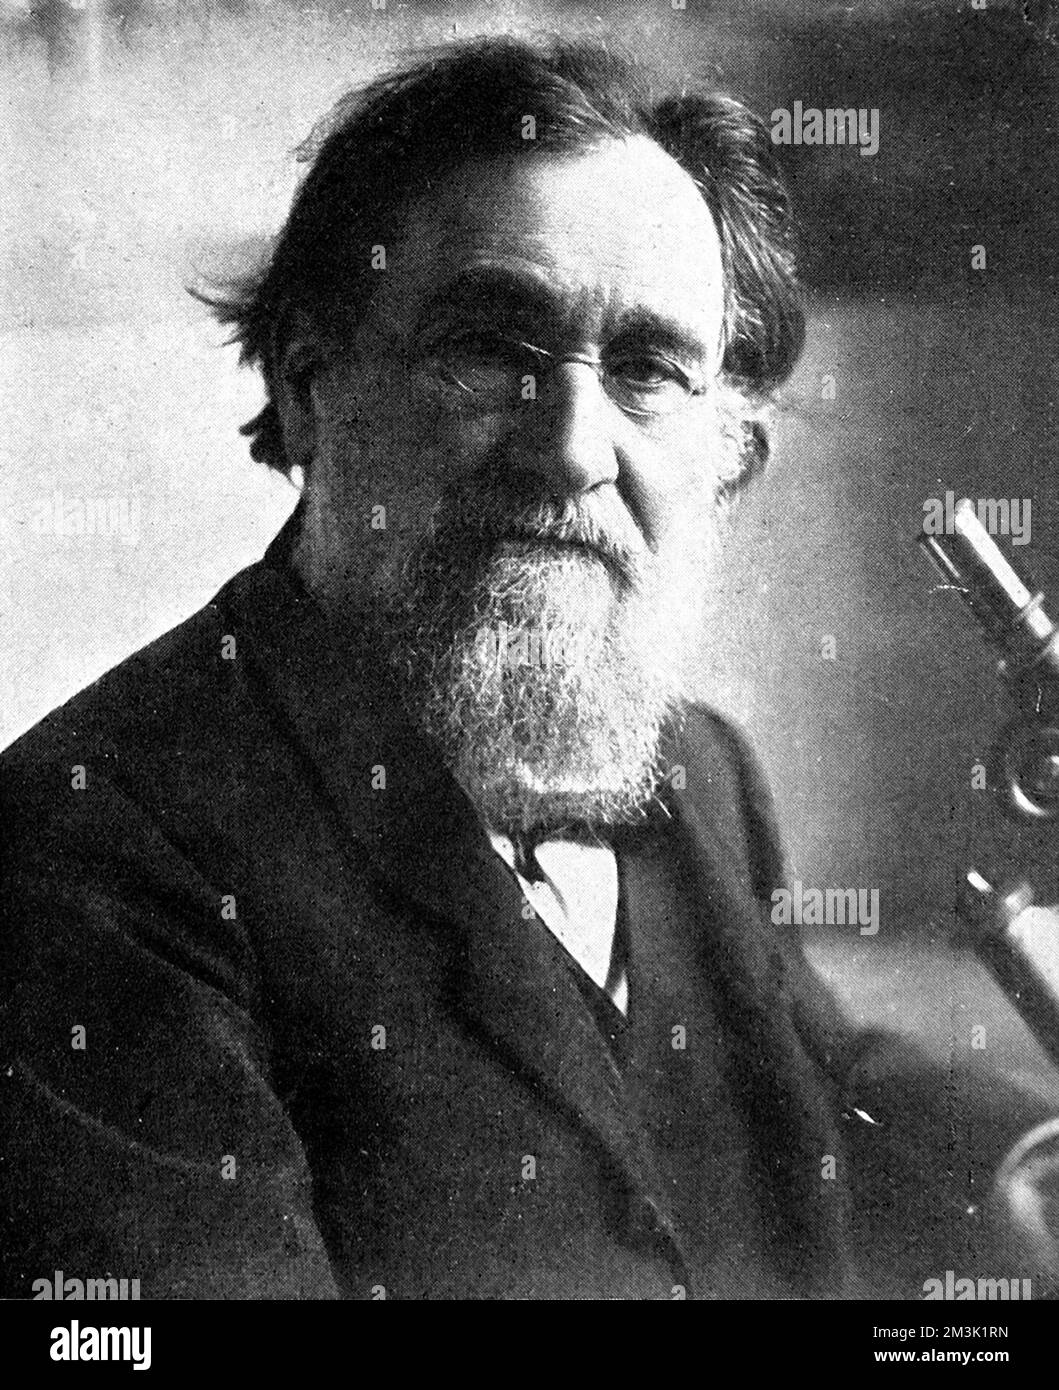 Professor Elie Metchnikoff (1845 - 1916), eminent Russian scientist. Metchnikoff became famous for his research as an embryologist and immunologist. He was jointly awarded the Nobel Prize for physiology or medicine in 1908. Stock Photo